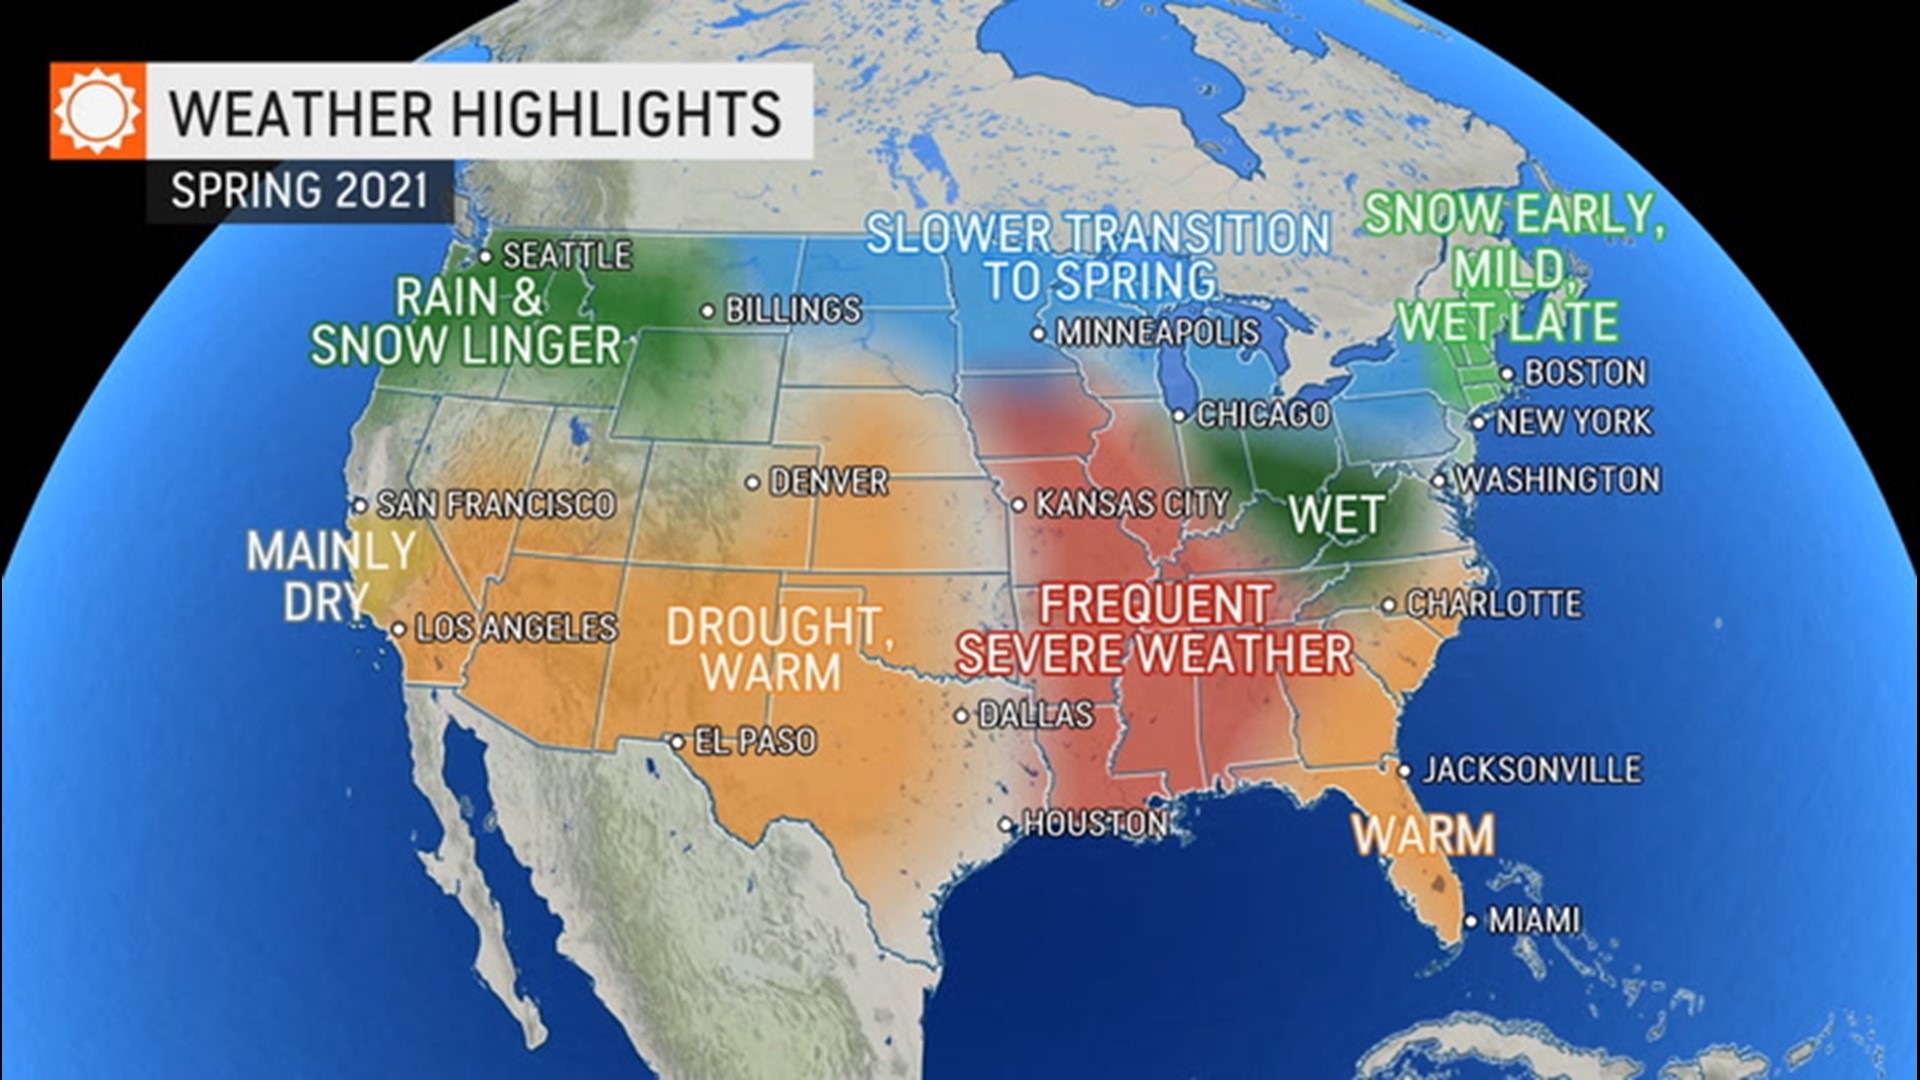 AccuWeather meteorologists look ahead to analyze what the spring of 2021 could have in store for the weather across the United States.